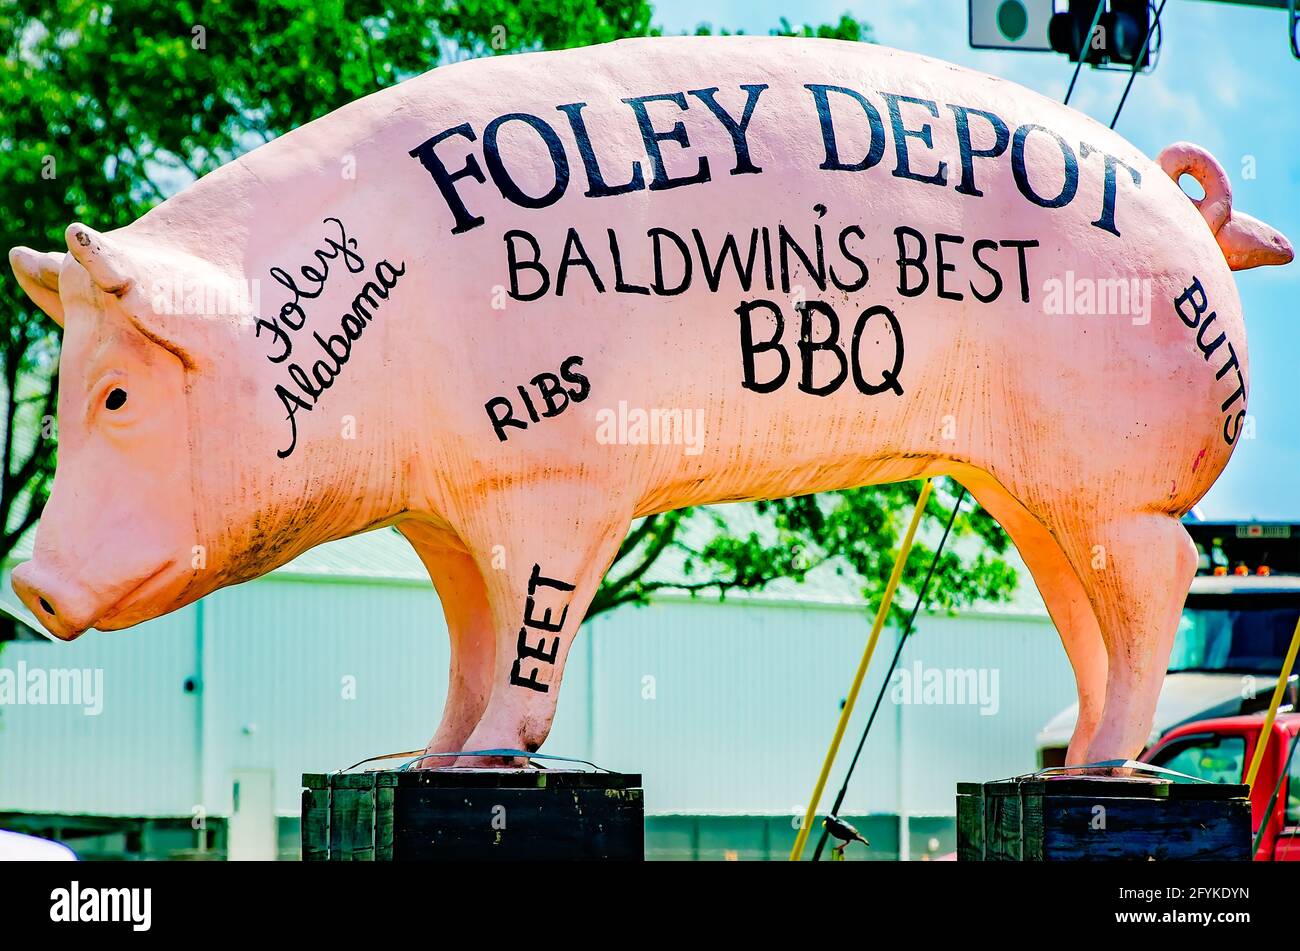 A pink pig statue advertises the Carolina-style barbecue at Foley Depot gas station, May 27, 2021, in Foley, Alabama. Stock Photo